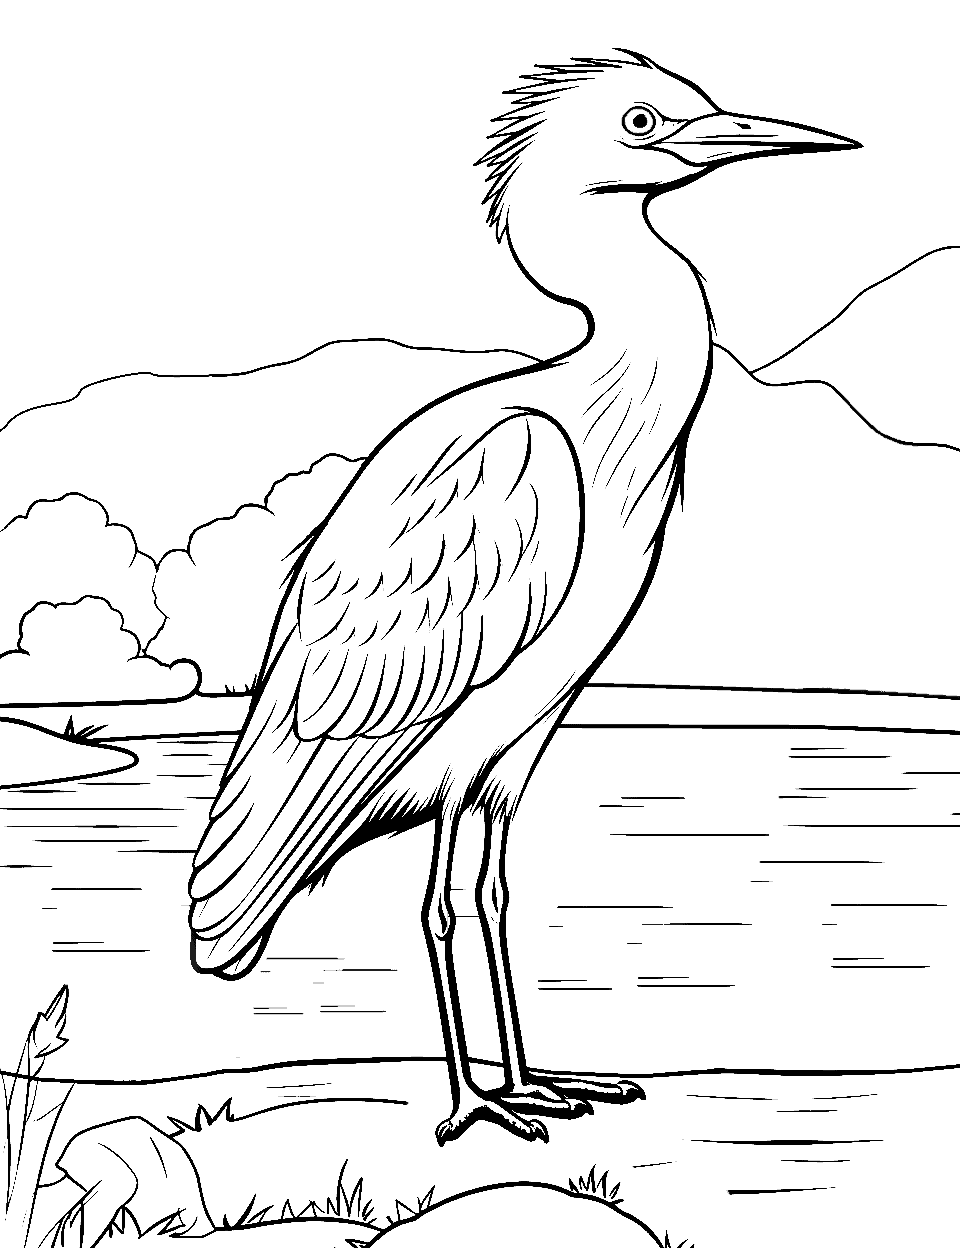 Crane by Water Coloring Page - A crane standing by the water waiting for fish to swim by.